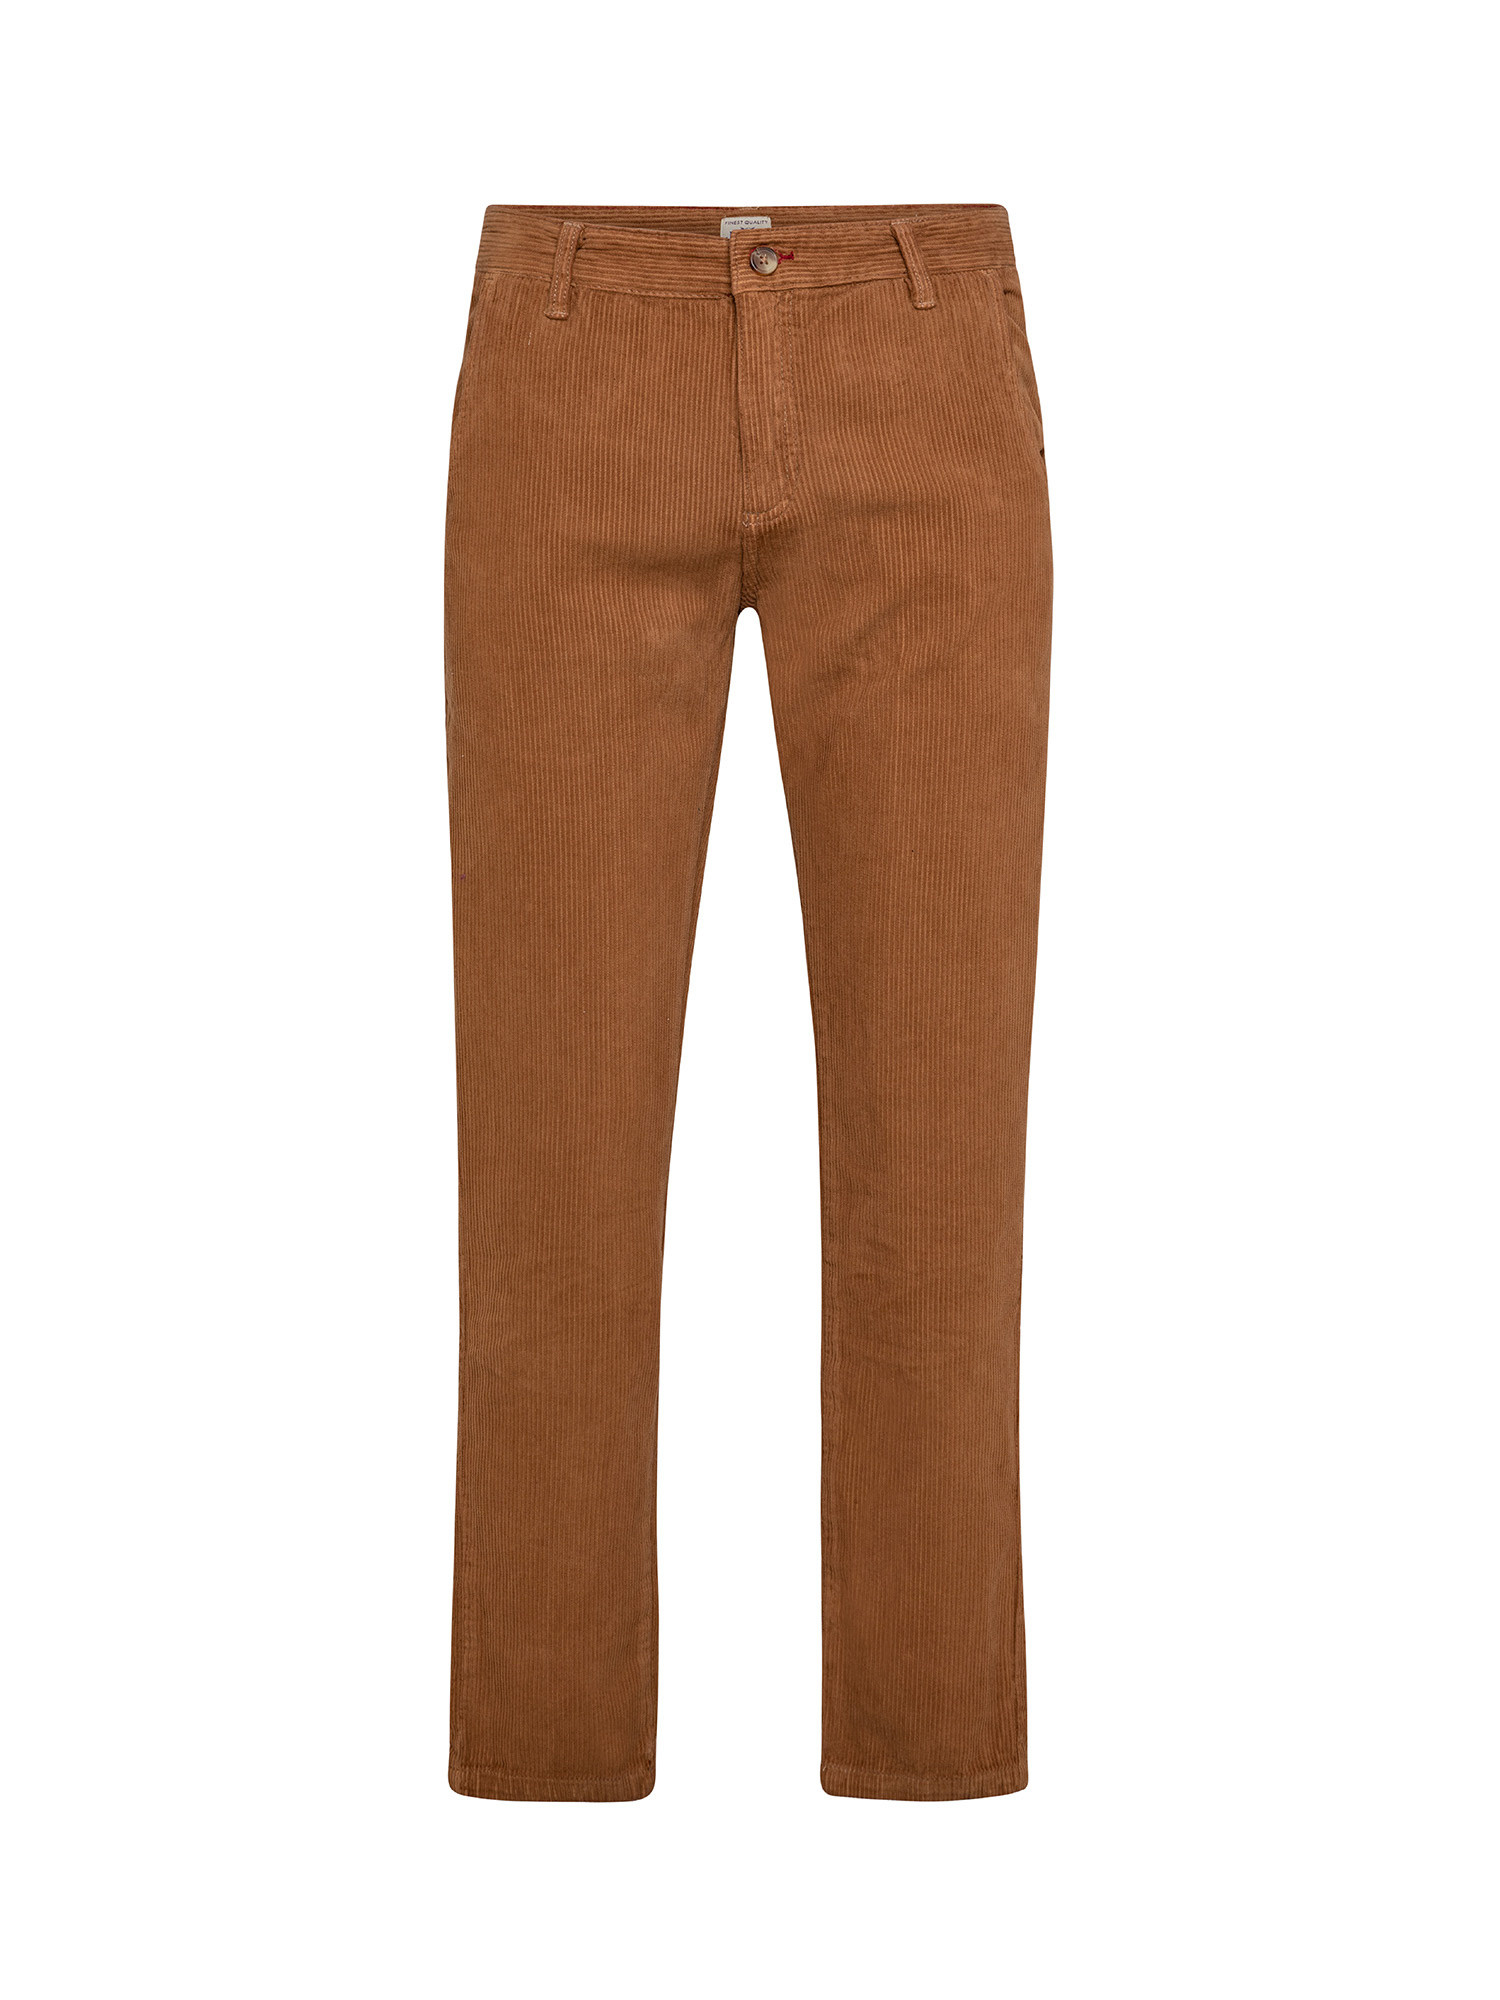 JCT - Velvet chino trousers, Brown, large image number 0